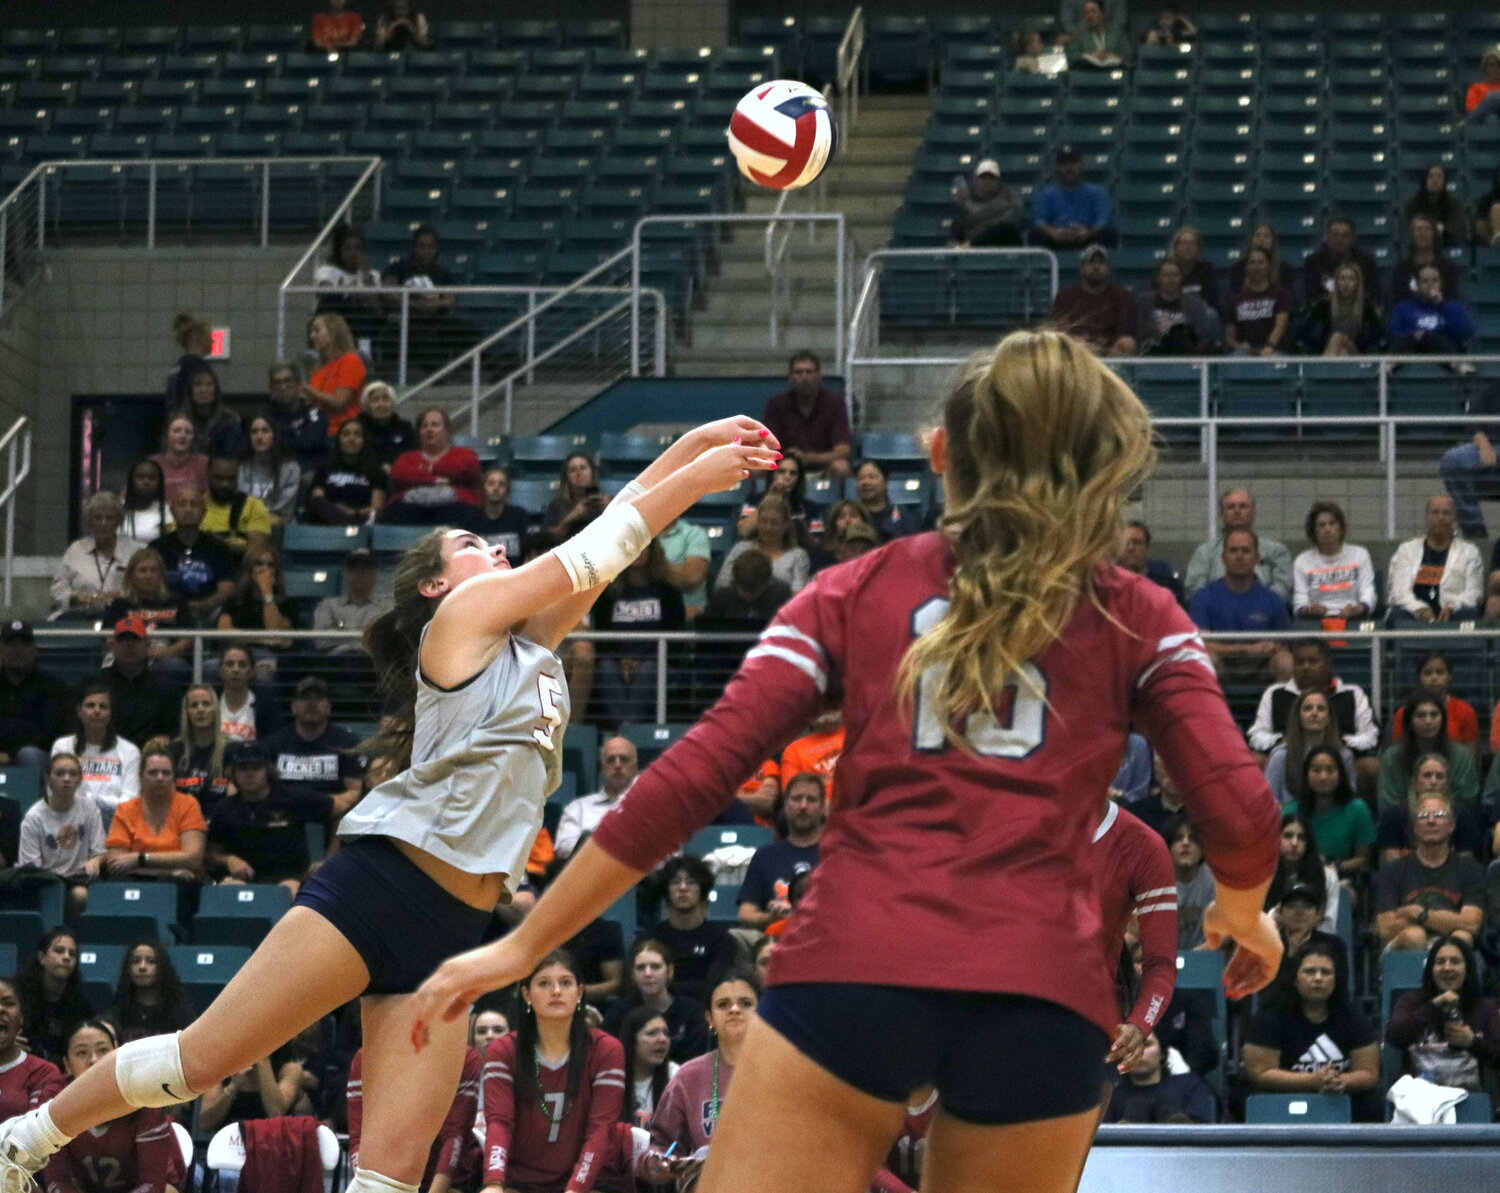 Tompkins’ Brooklynn Merrell digs a ball during Tuesday’s match between Seven Lakes and Tompkins at the Merrell Center.